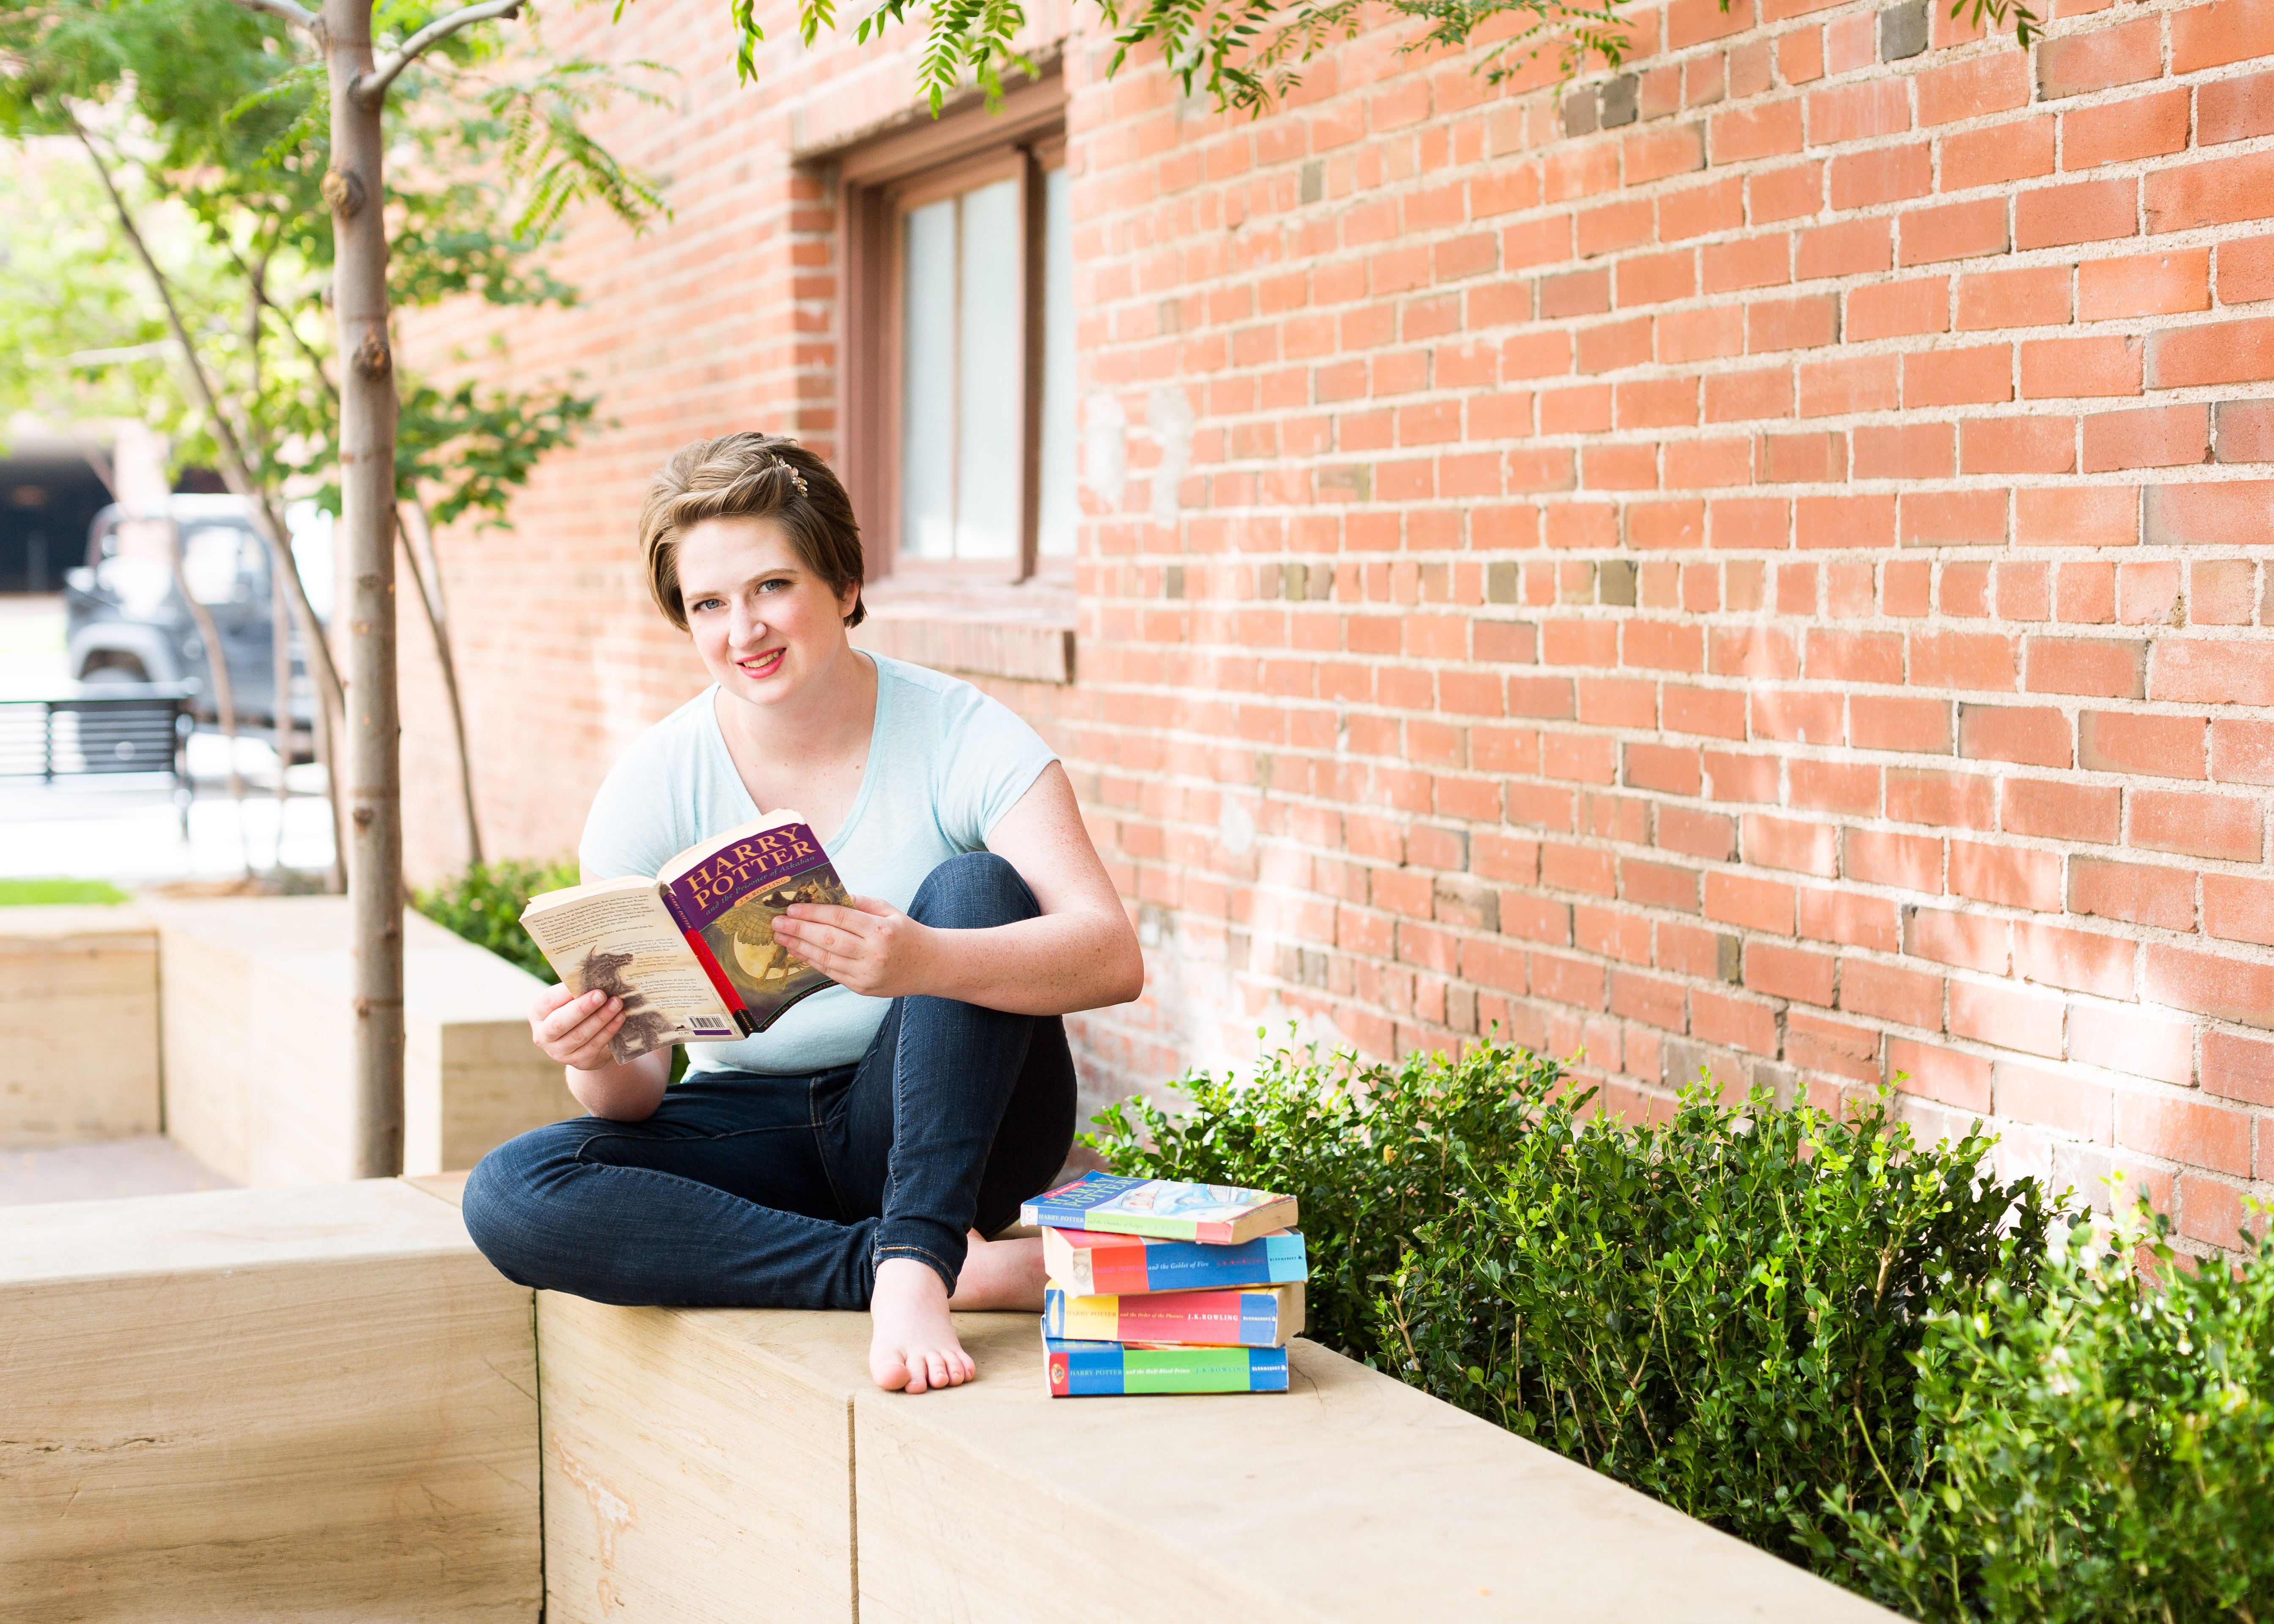 Senior girl sits with her legs crossed on a bench while reading Harry Potter books